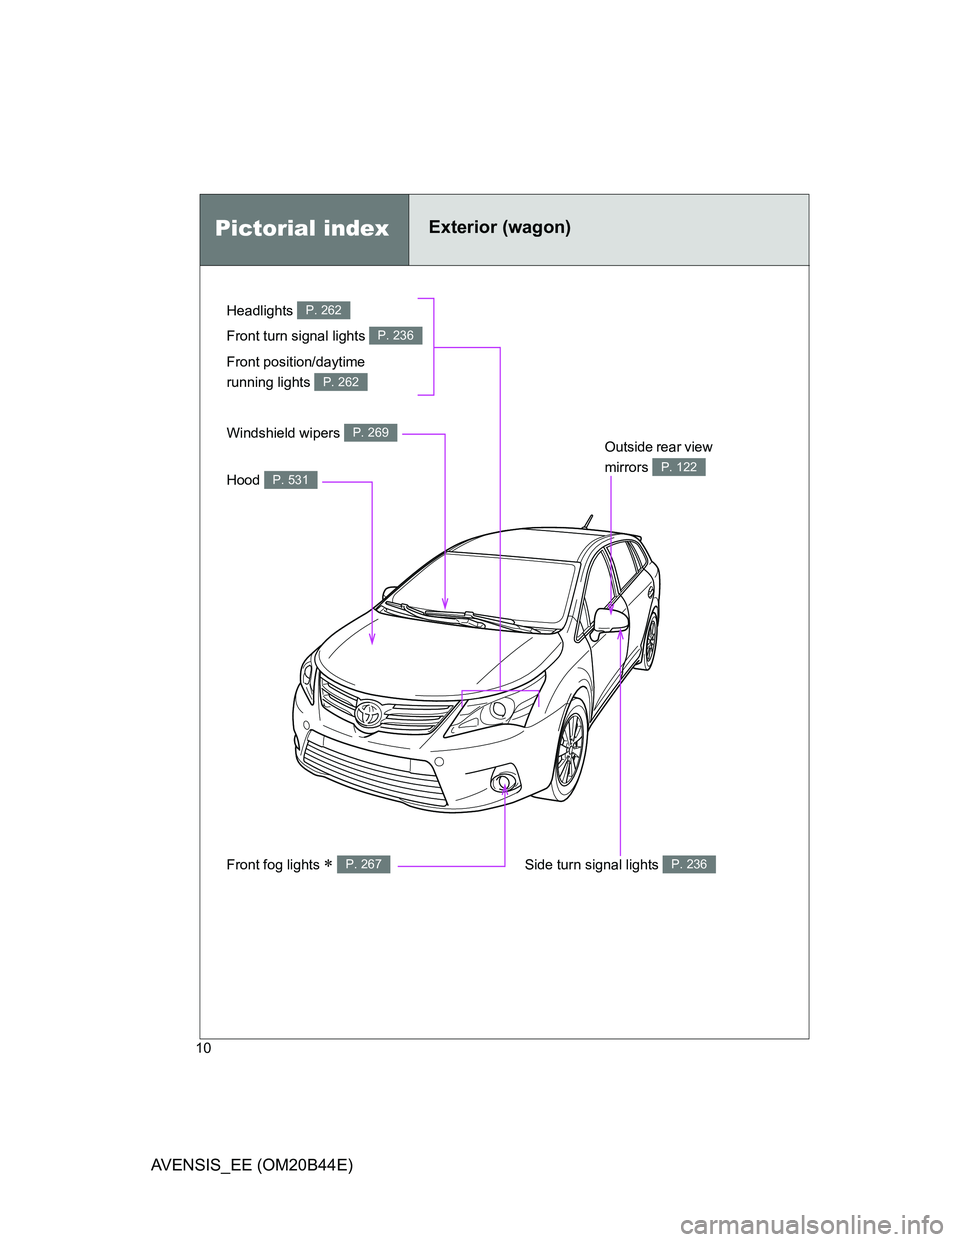 TOYOTA AVENSIS 2013  Owners Manual (in English) 10
AVENSIS_EE (OM20B44E)
Pictorial indexExterior (wagon)
Headlights P. 262
Front fog lights  P. 267
Front turn signal lights P. 236
Hood P. 531
Windshield wipers P. 269Outside rear view 
mirrors 
P